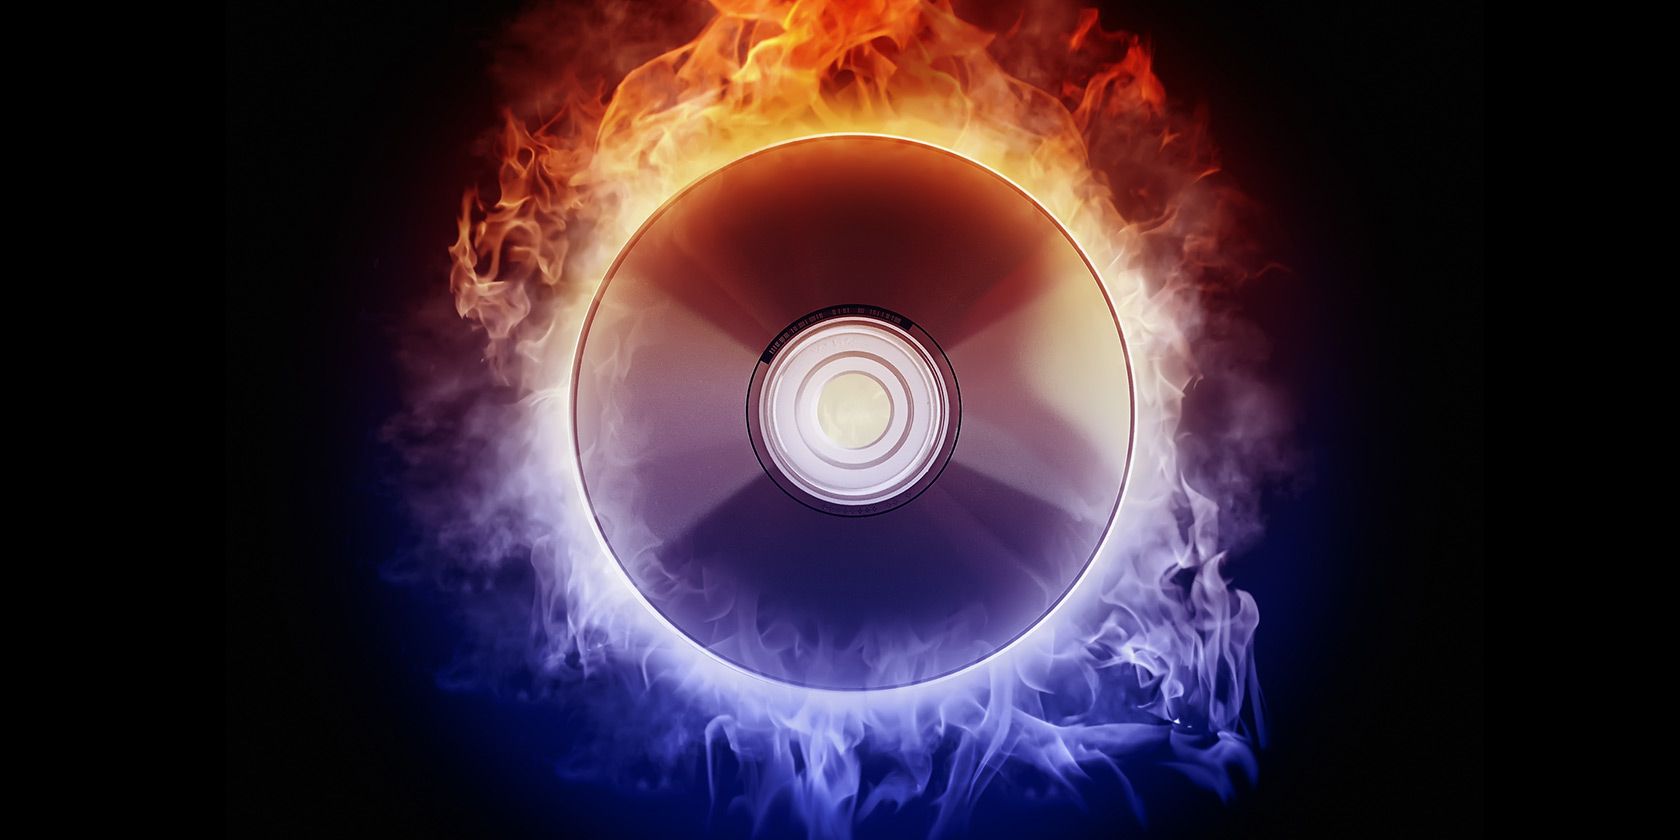 software that will break down copy protected dvds